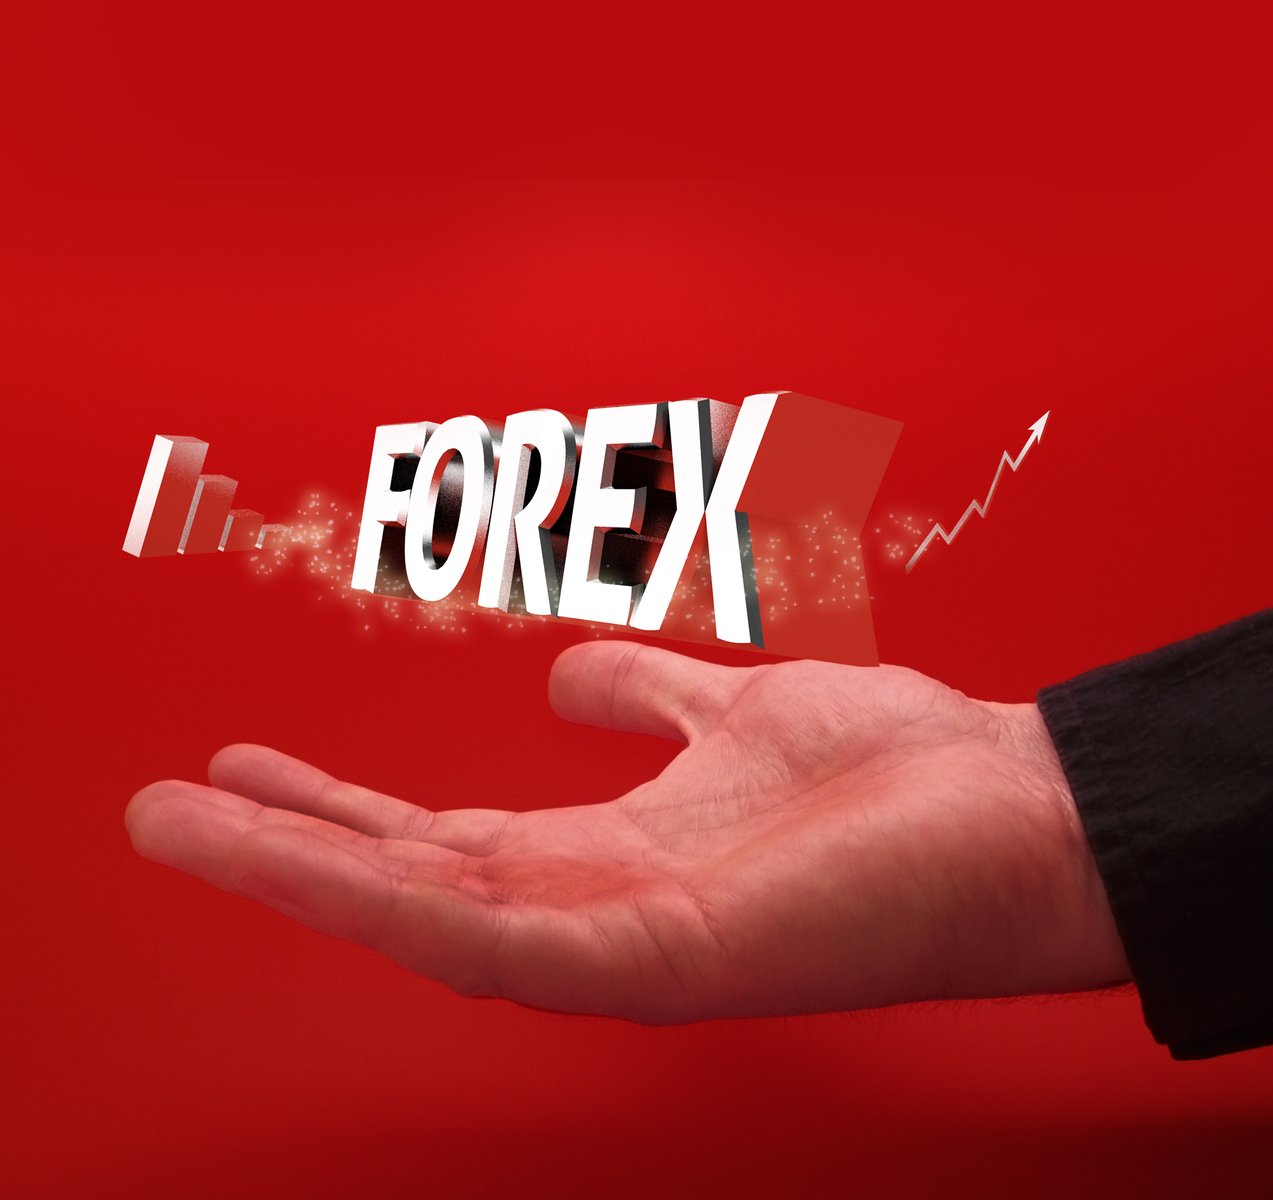 the word forex is appearing above an outstretched hand